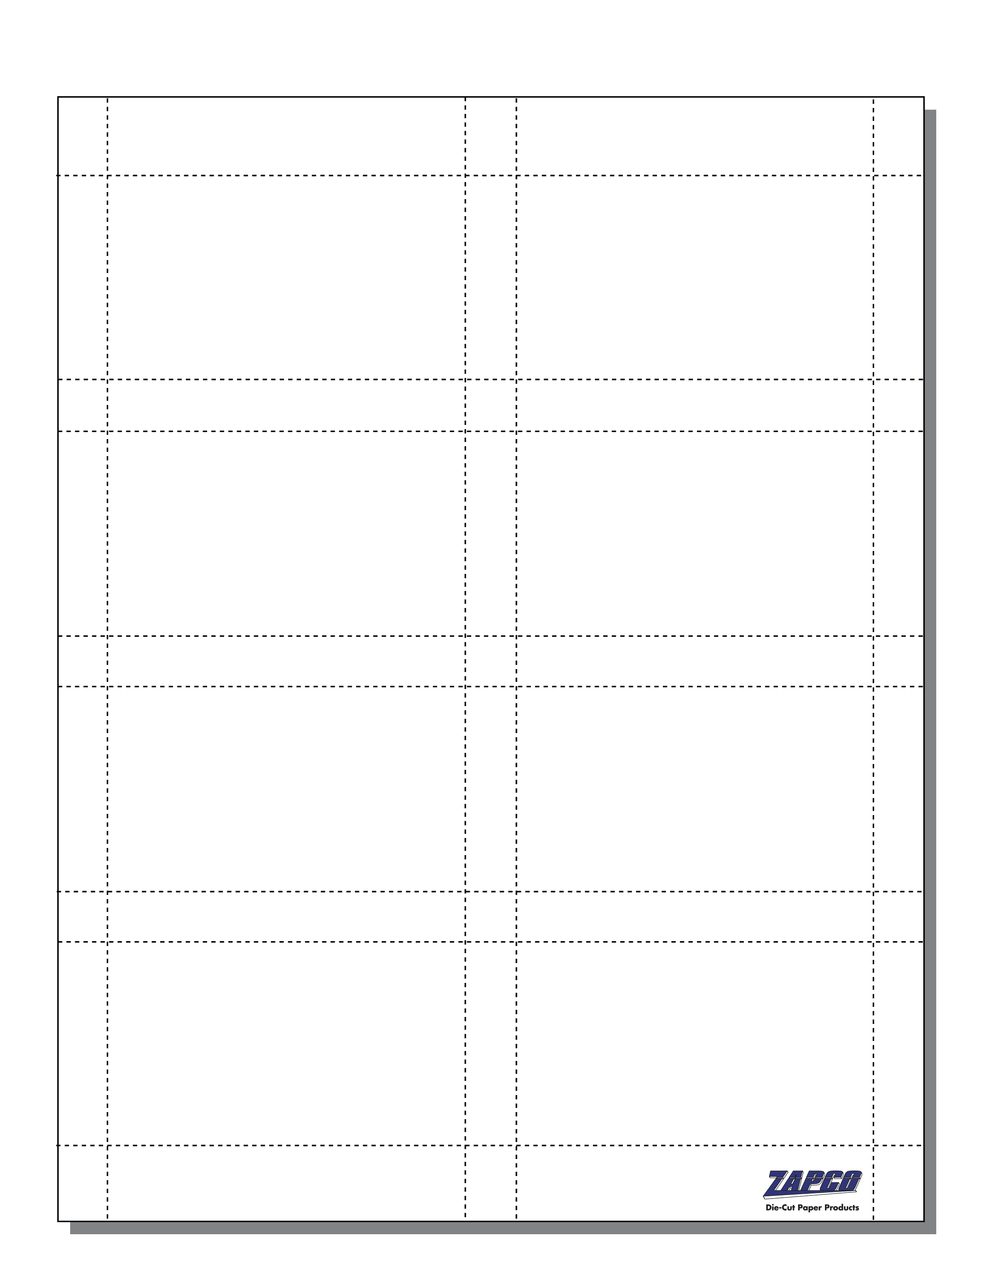 Item 613: 8-Up 3 1/2" x 2" Business Card Paper With Bleed 8 1/2" x 11" Sheet (250 Sheets)